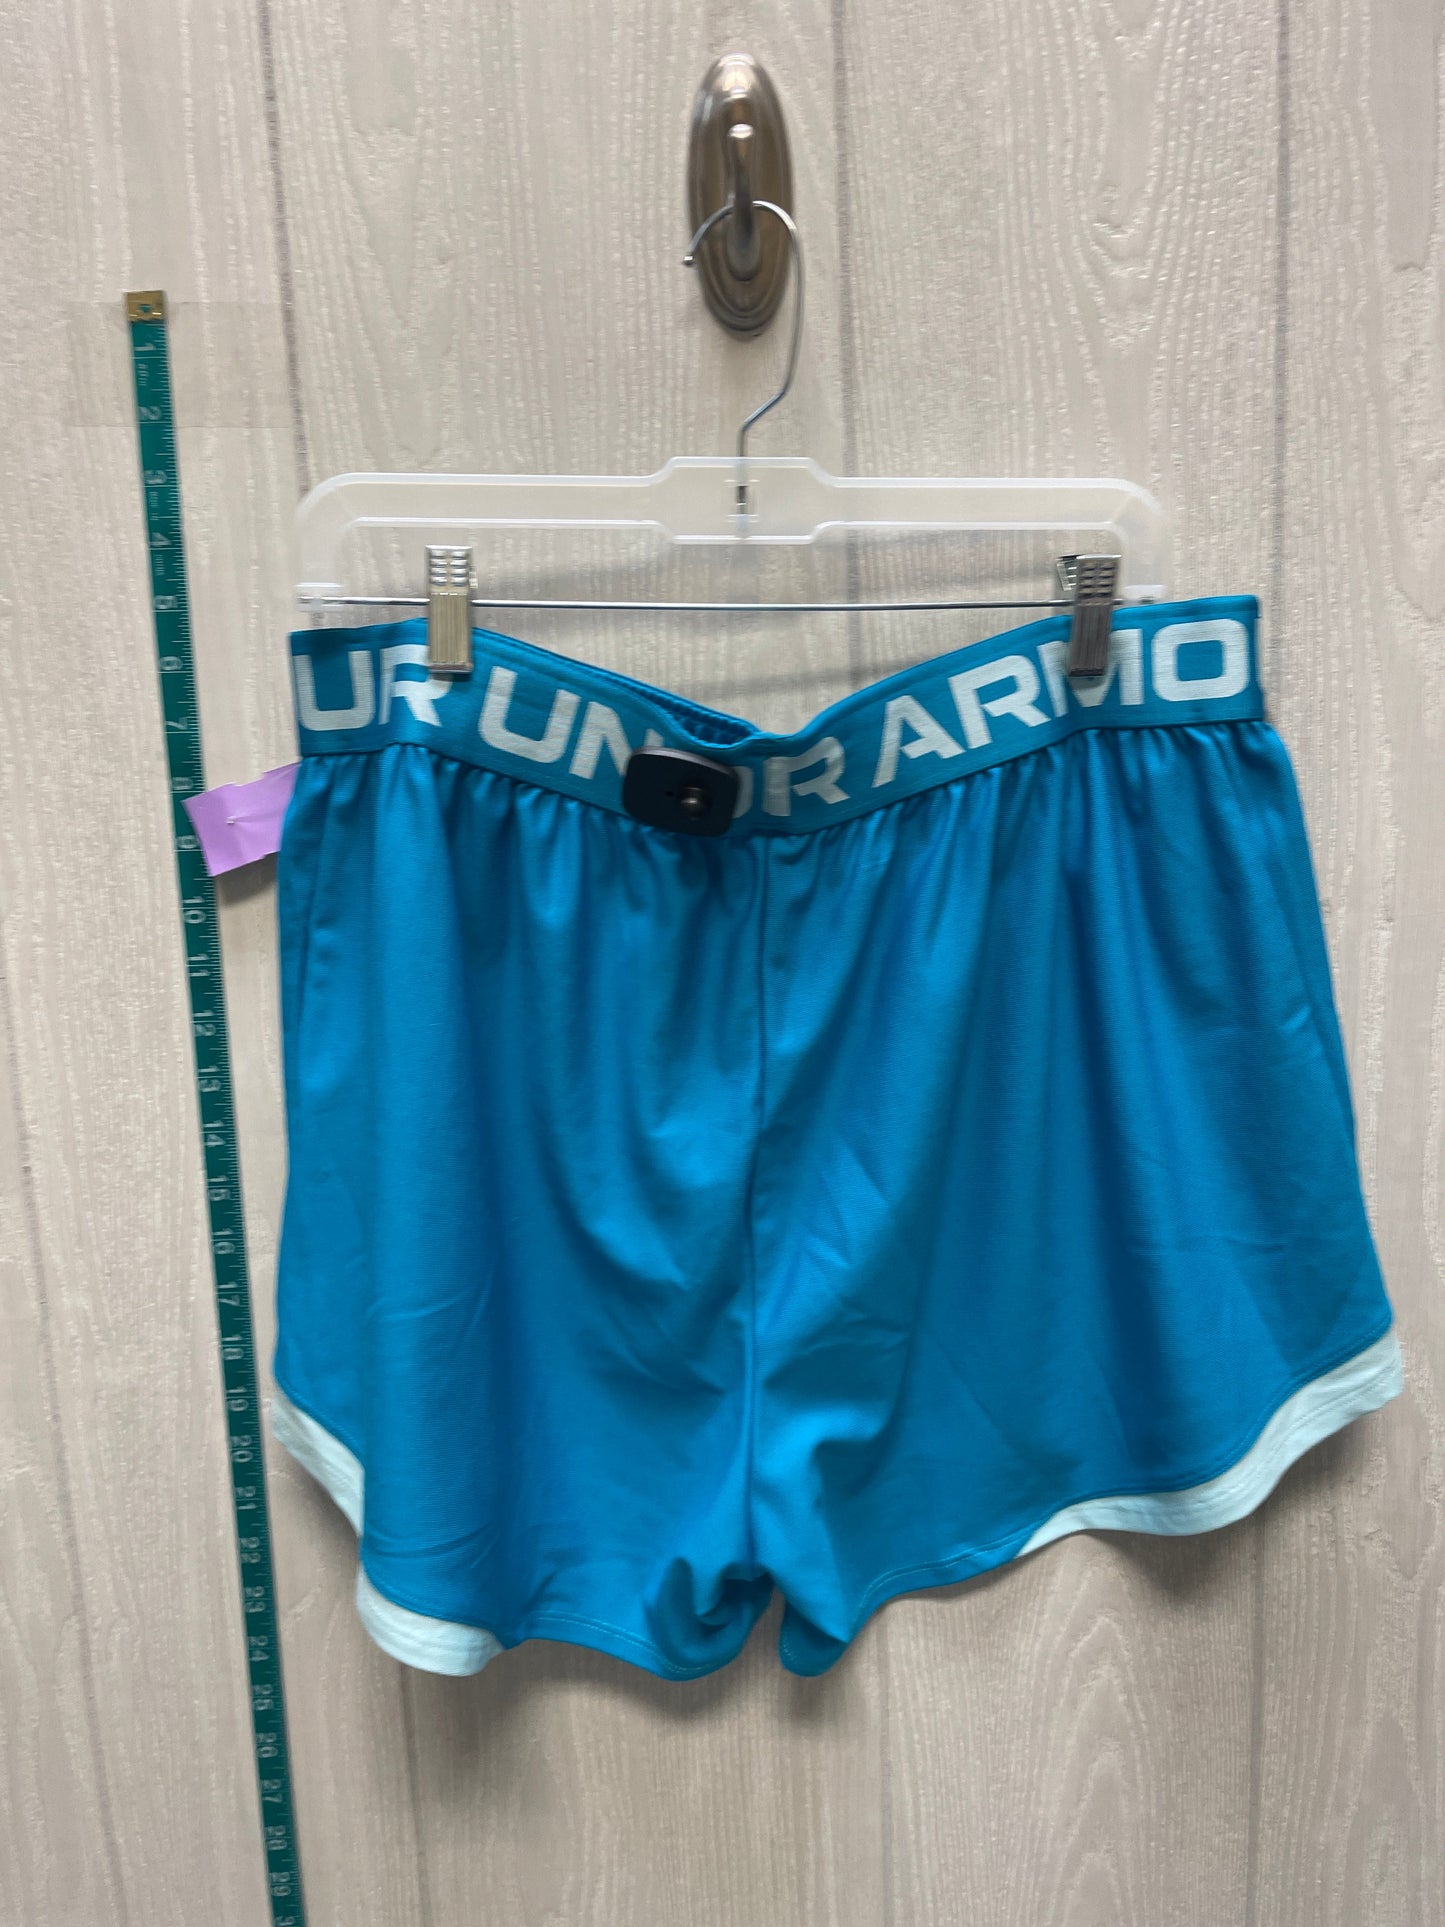 Blue Athletic Shorts Under Armour, Size 1x